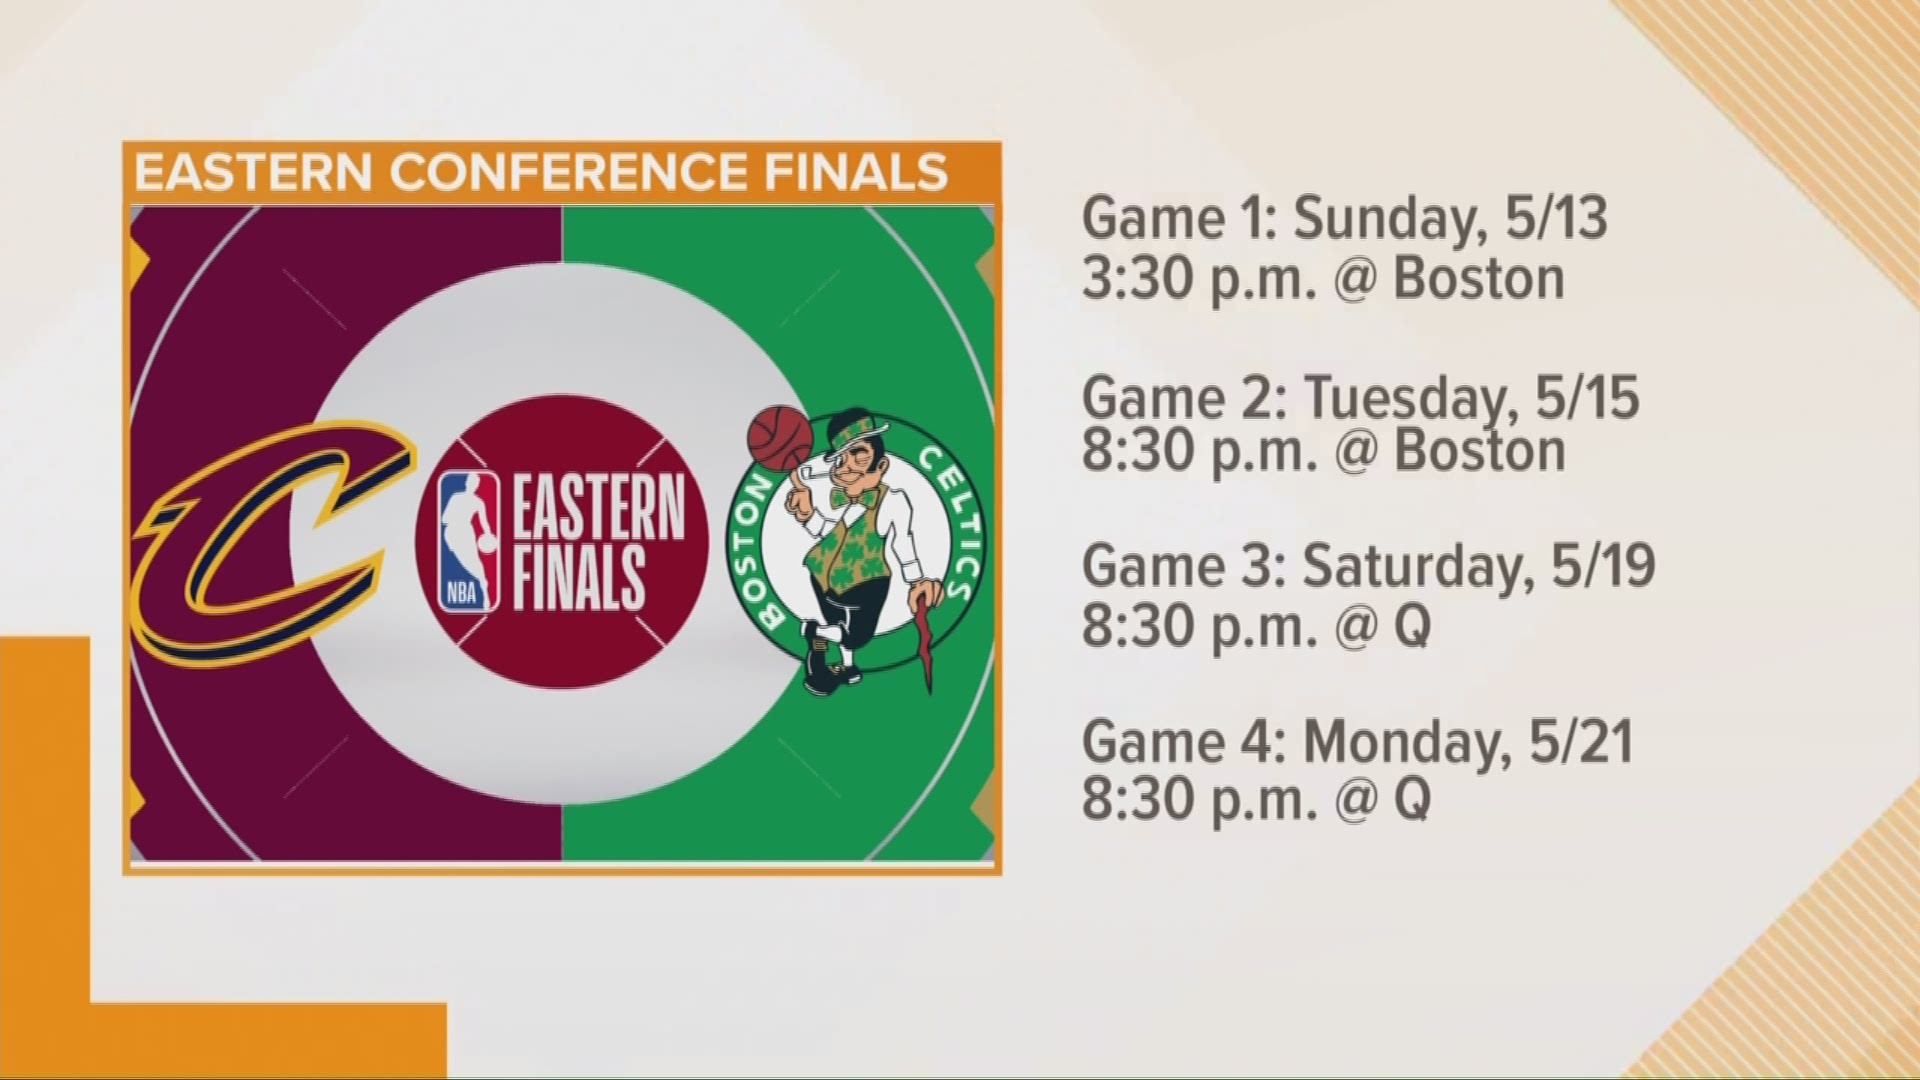 May 2018: The NBA has announced the playoffs schedule as the Cleveland Cavaliers face off against the Boston Celtics.